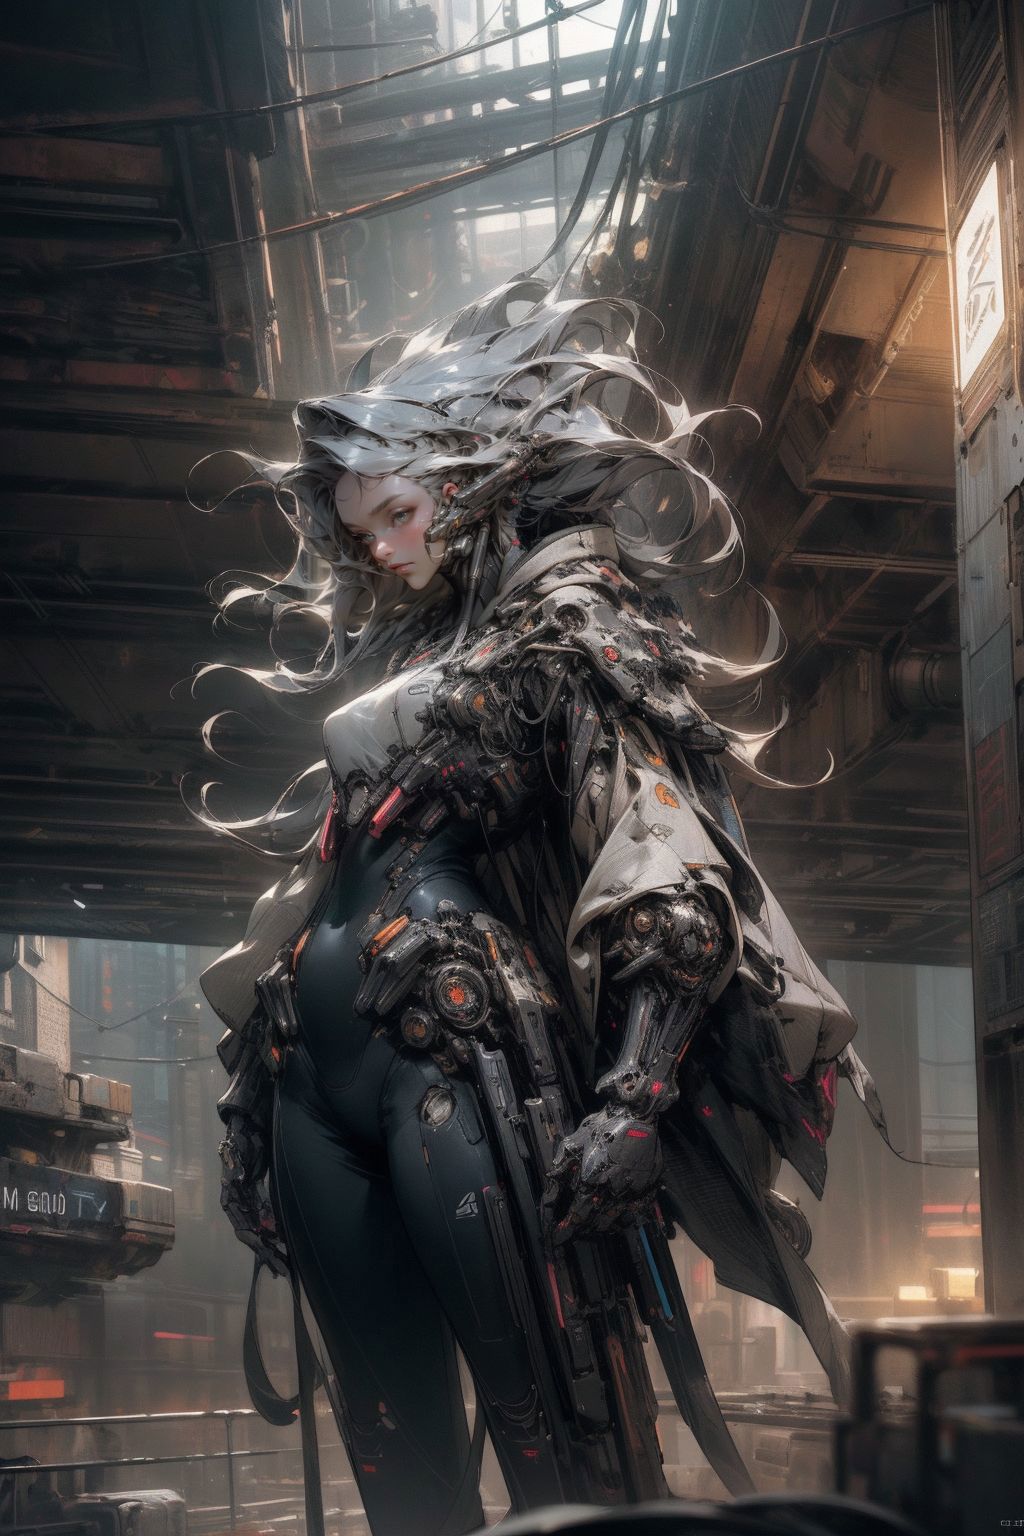 A woman with silver hair and a mechanical outfit on, standing in a futuristic environment.